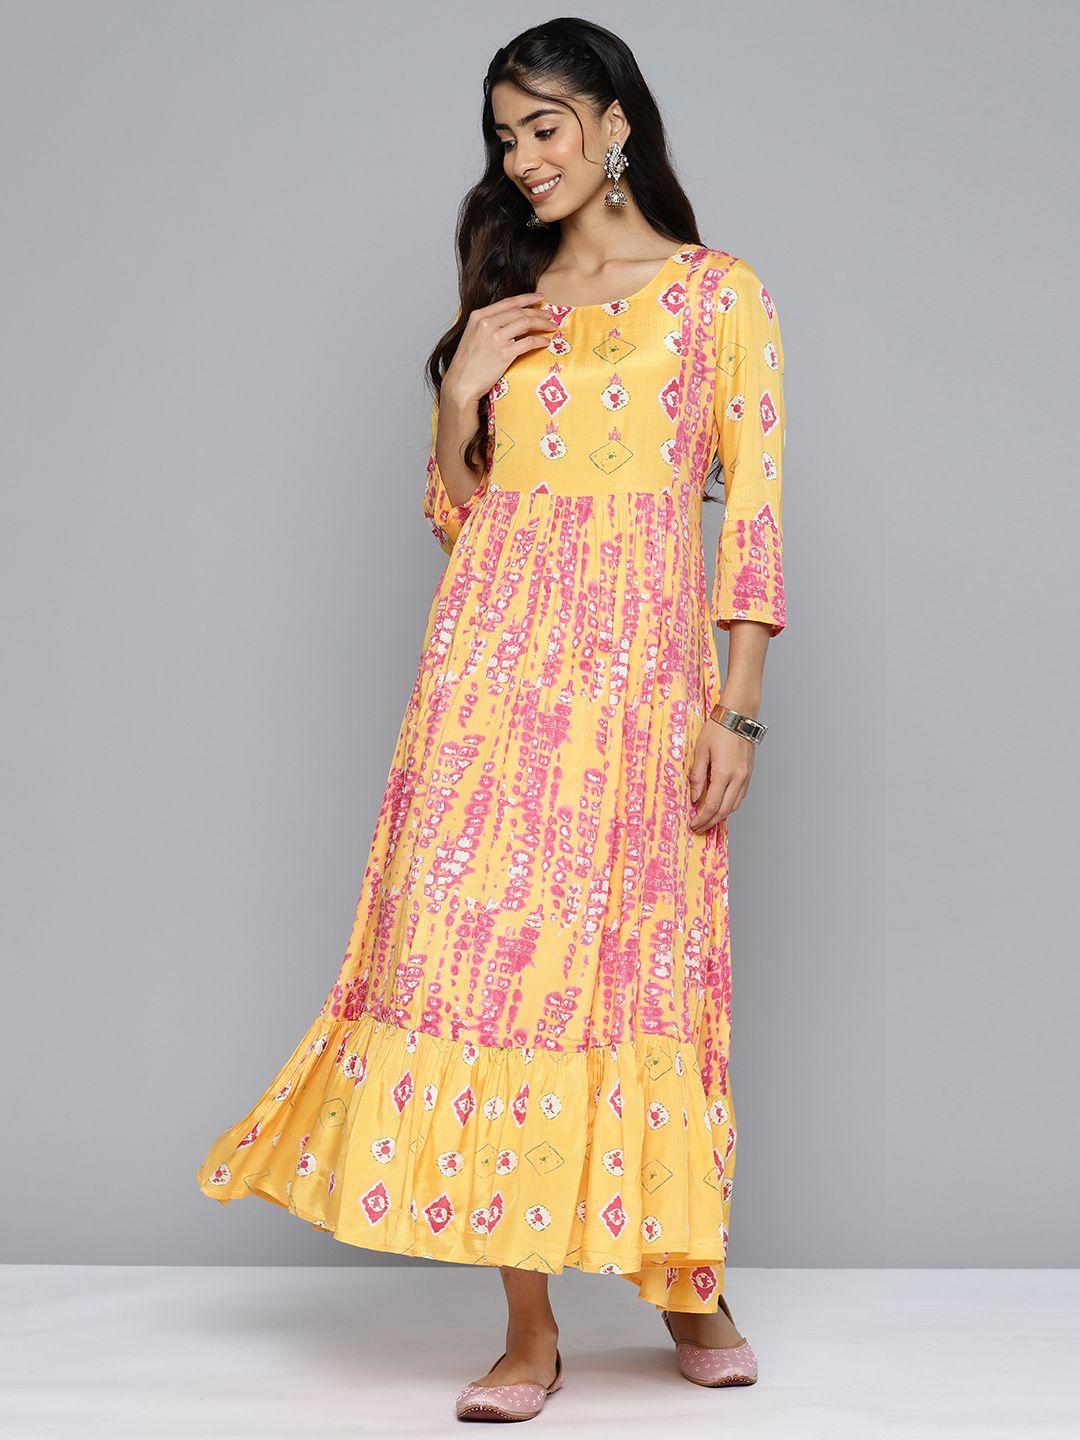 here&now-yellow-&-pink-floral-print-a-line-midi-dress